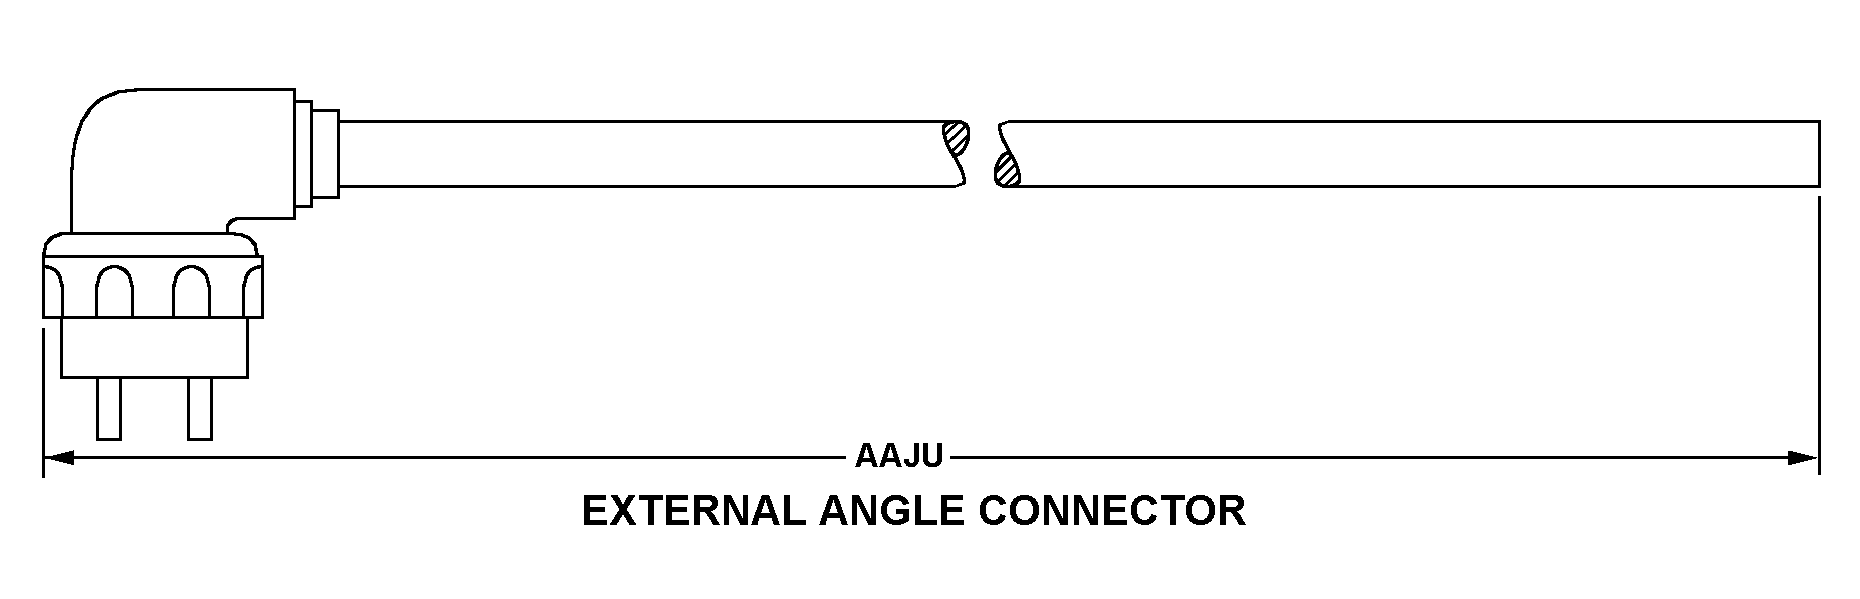 EXTERNAL ANGLE CONNECTOR style nsn 5995-01-203-9446